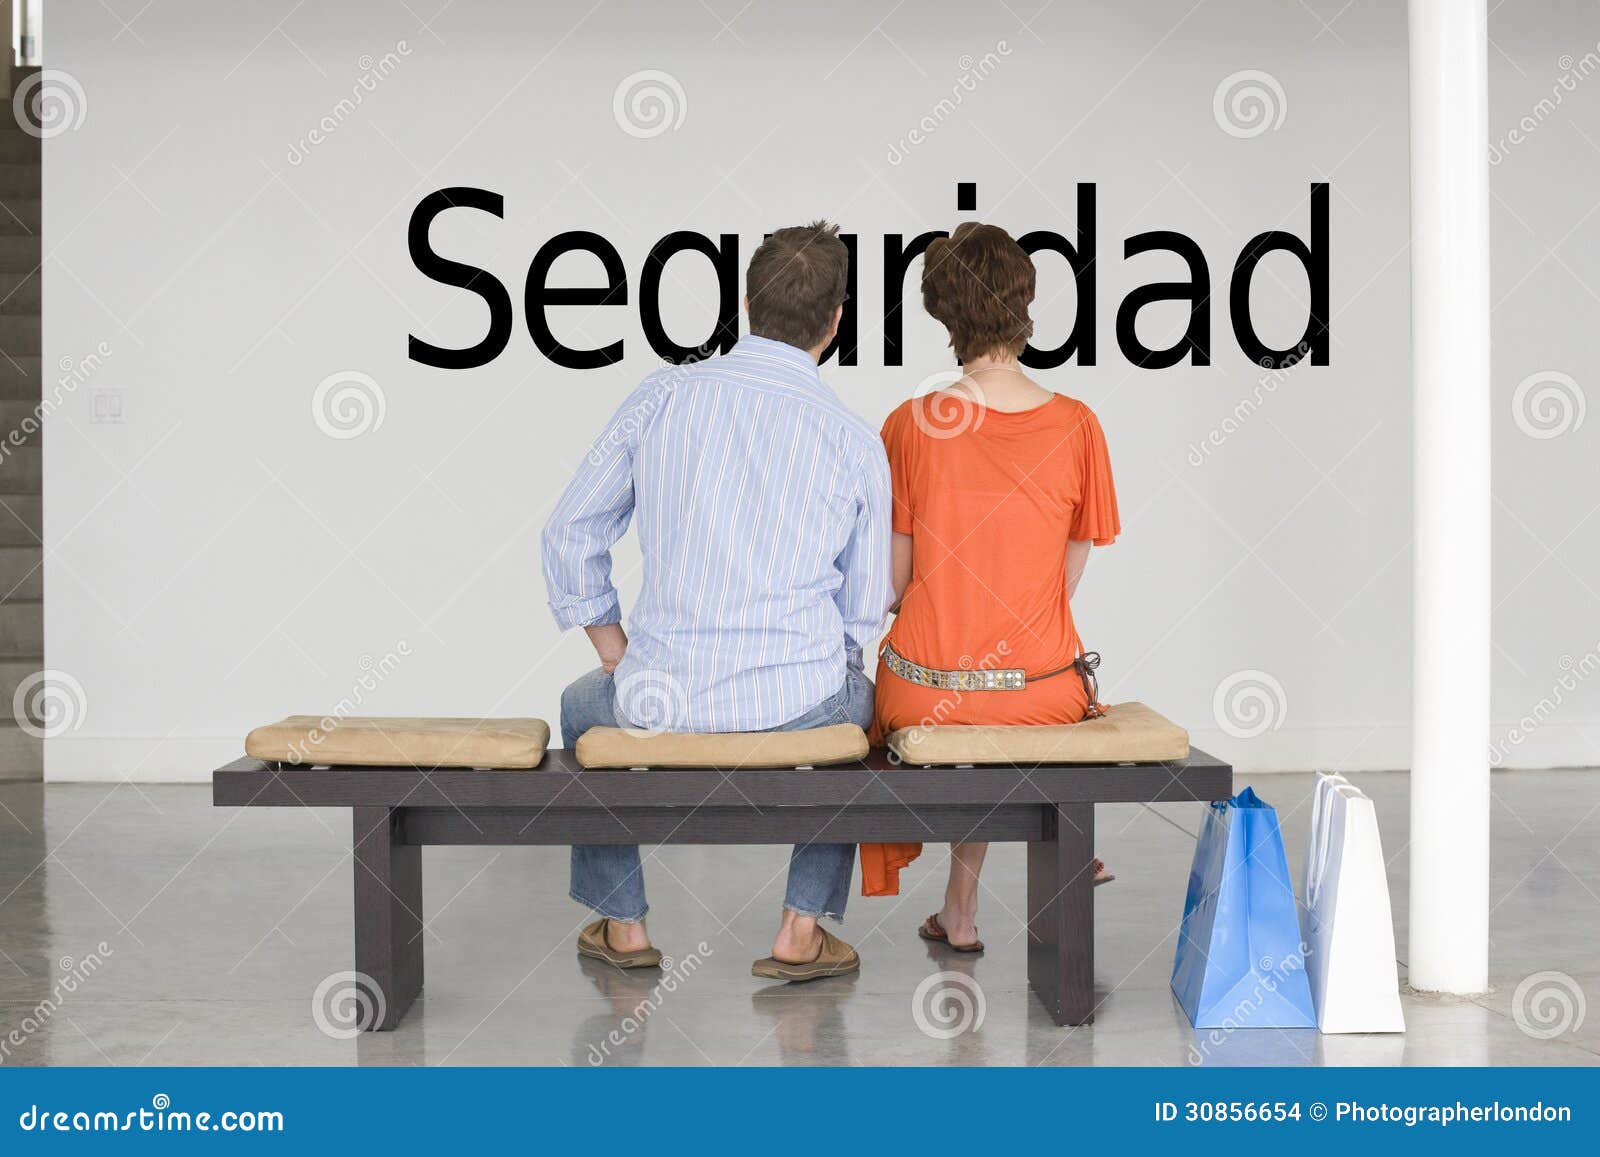 rear view of couple reading spanish text seguridad (security) and contemplating it